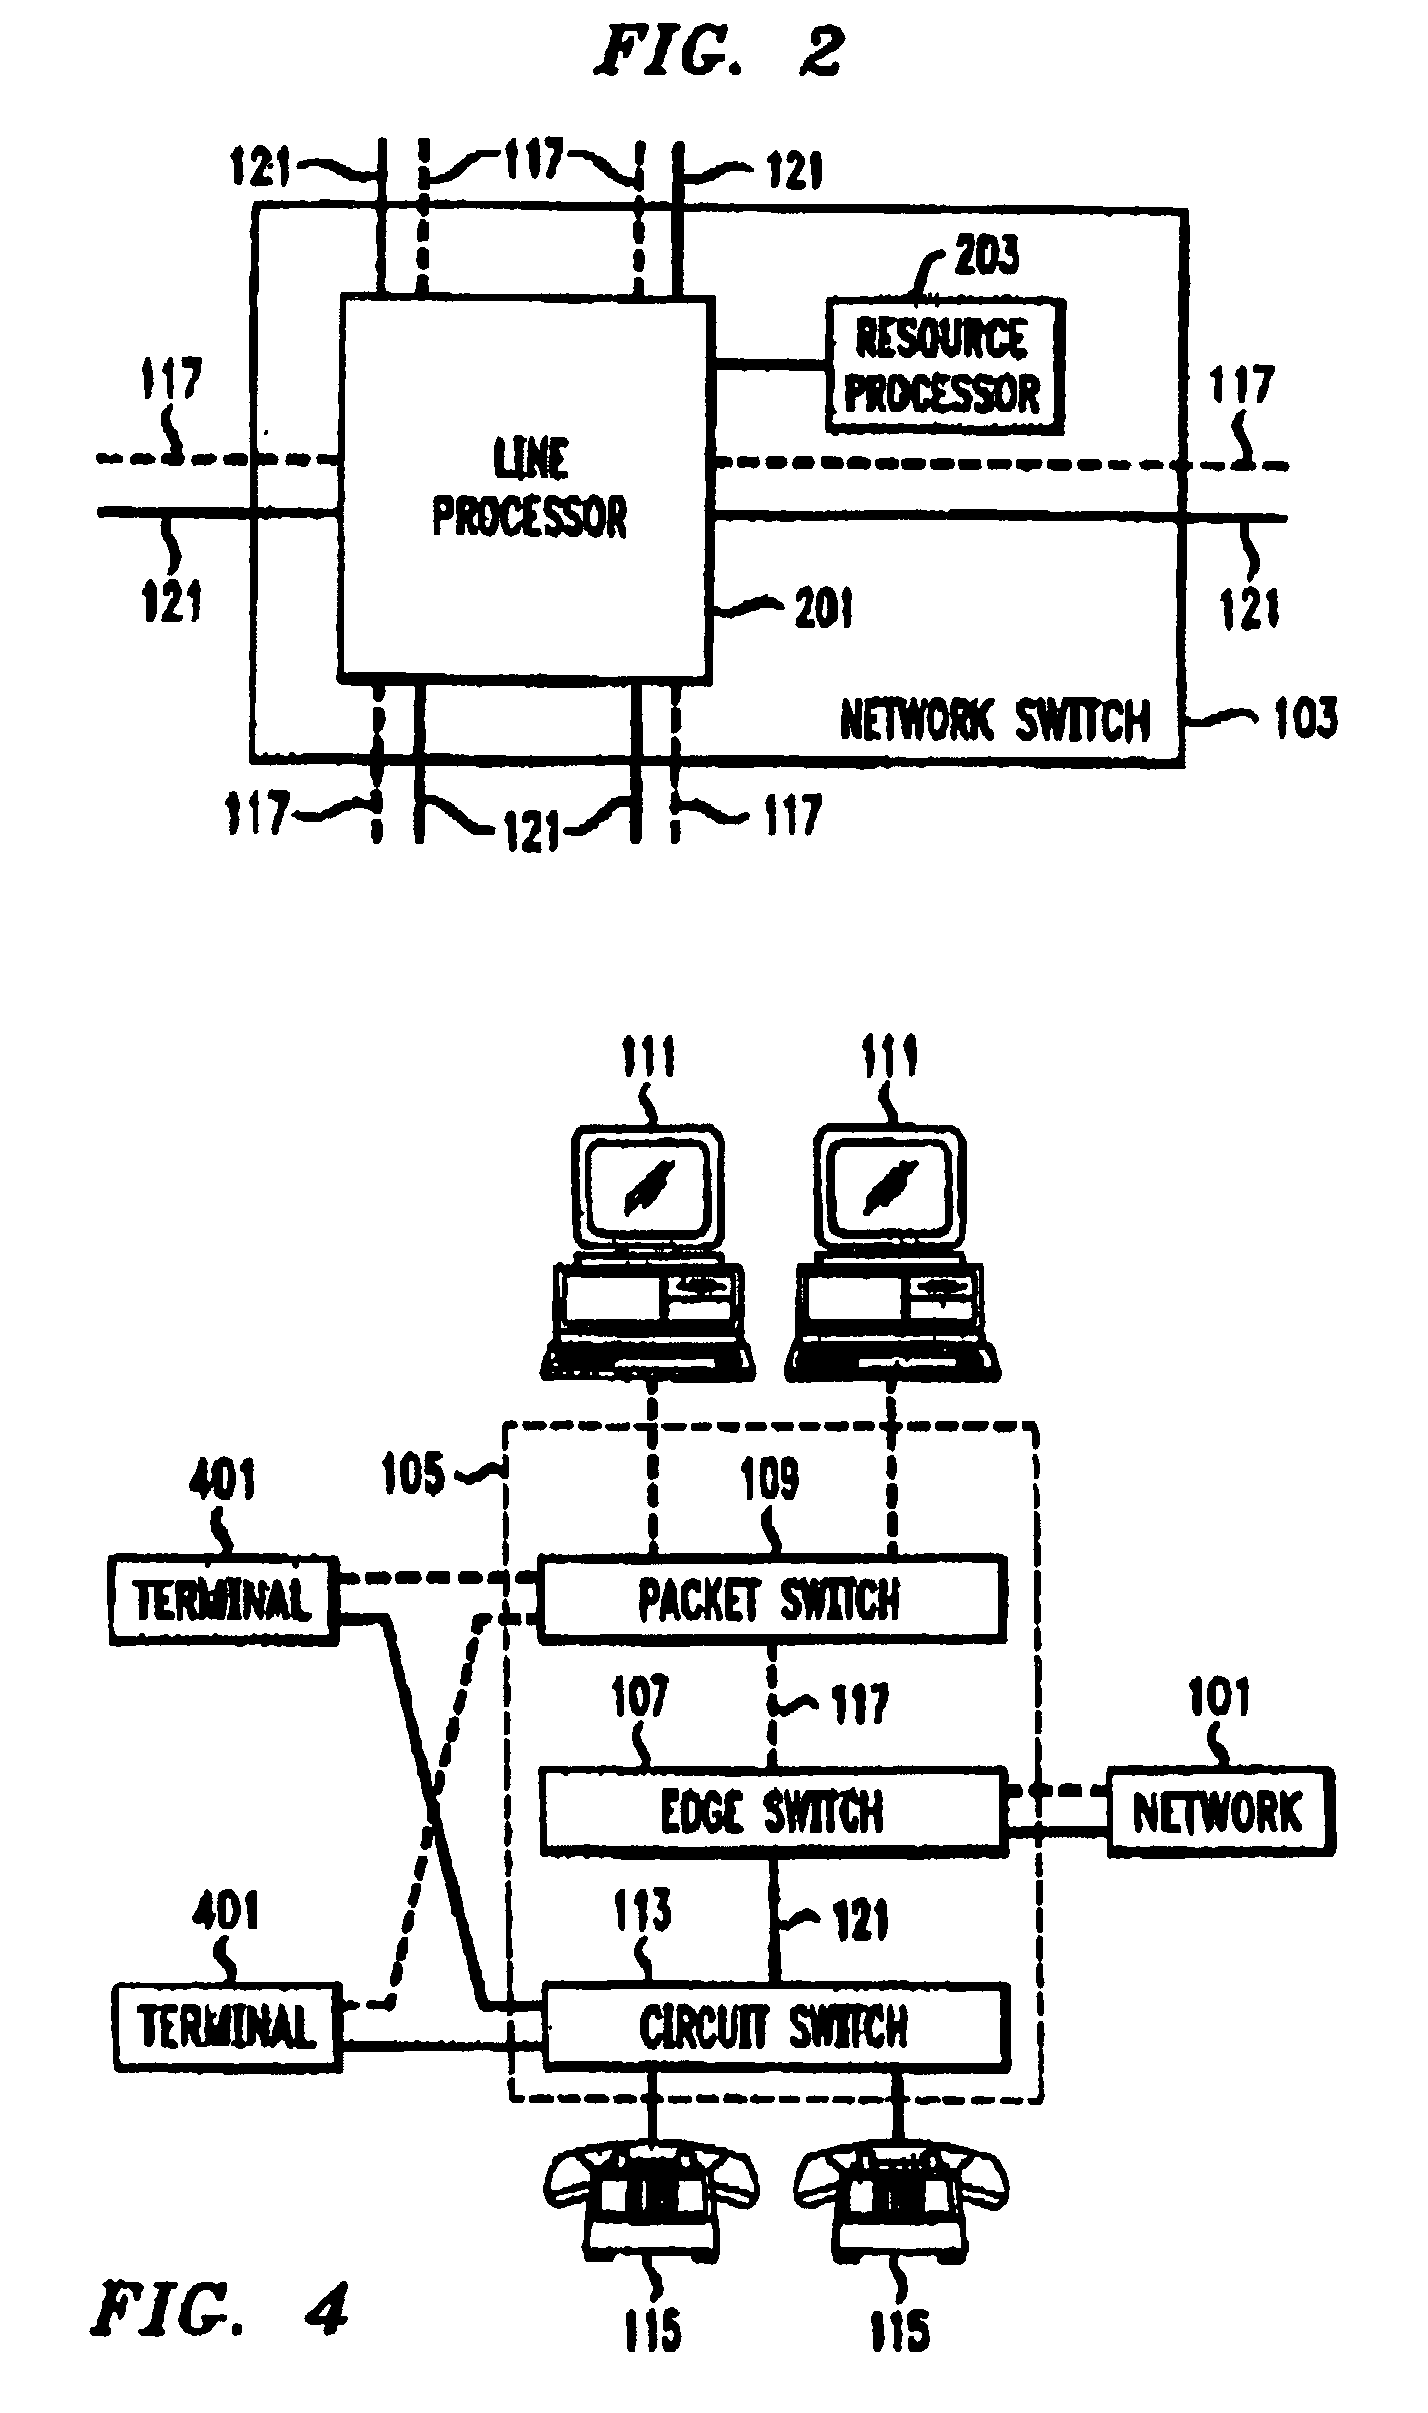 Apparatus, system and method for managing circuit and packet-switched calls on a network